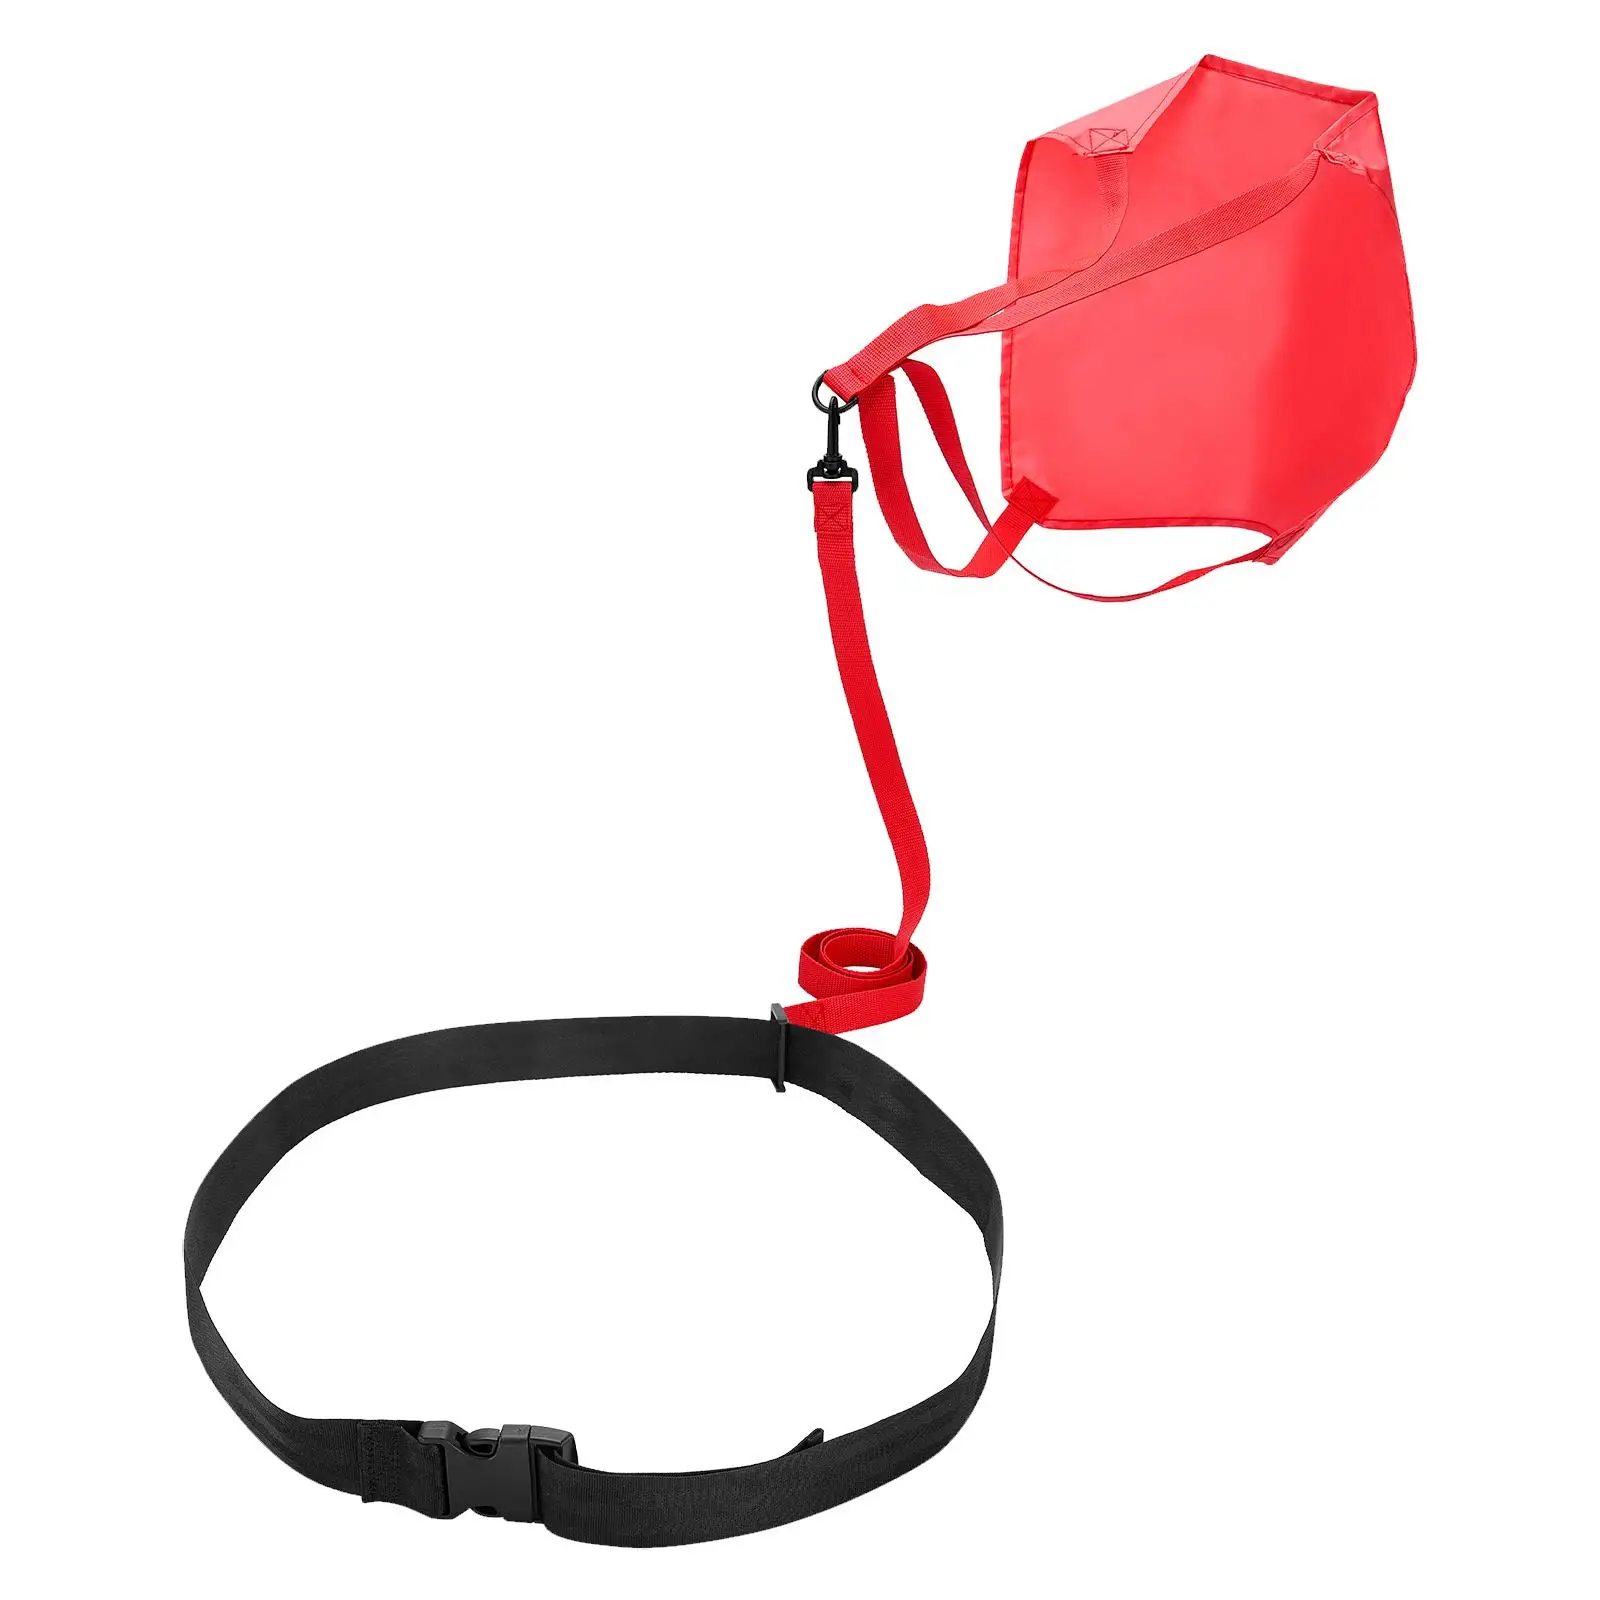 Swim Parachute Aids Speed Training Improves Strength Coordination Swimming Resistance Belt for Beginners